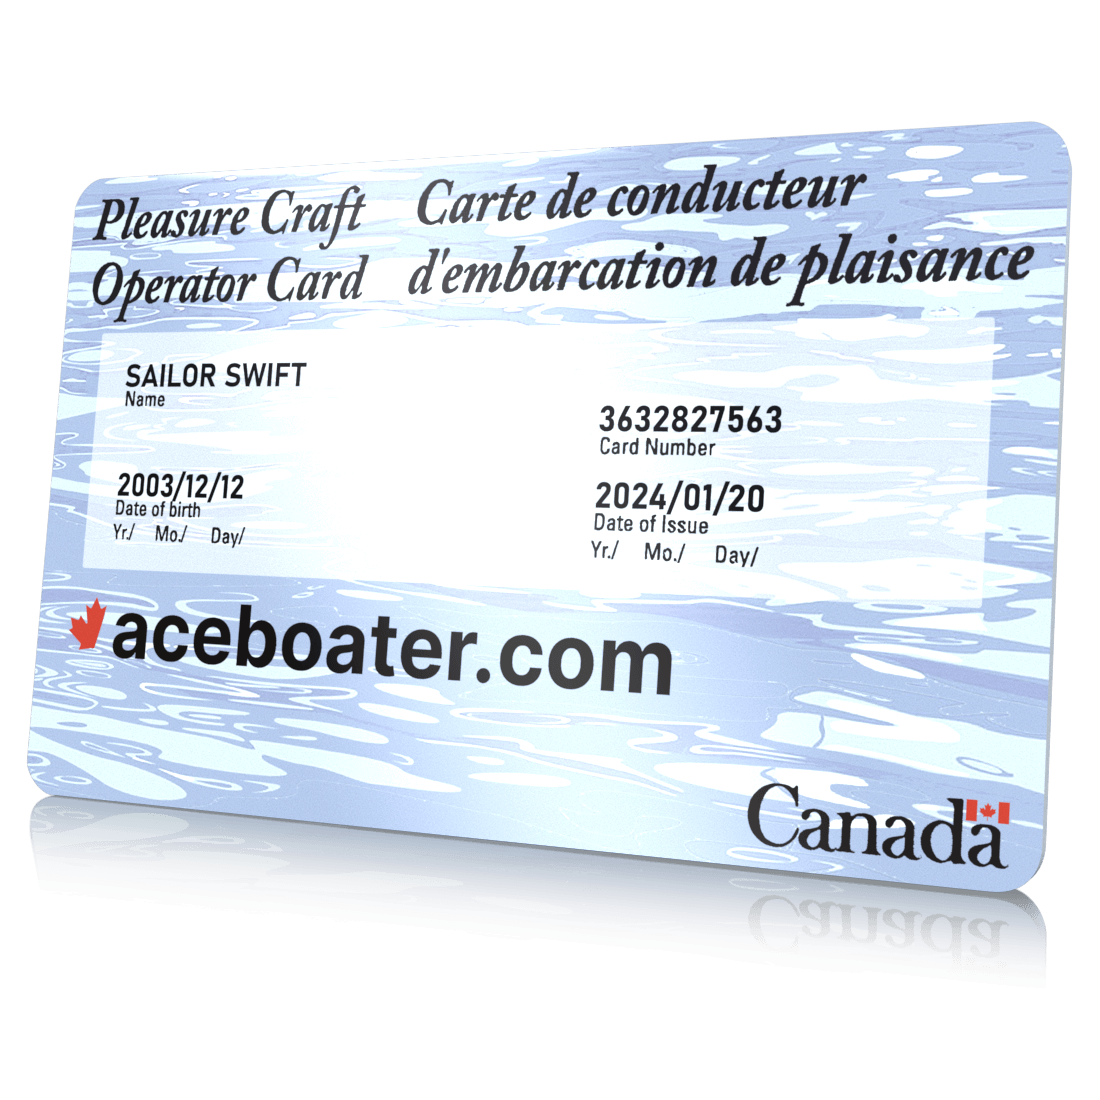 Aceboater Card Angle2 Hr ?width=1650&height=1650&name=aceboater Card Angle2 Hr 